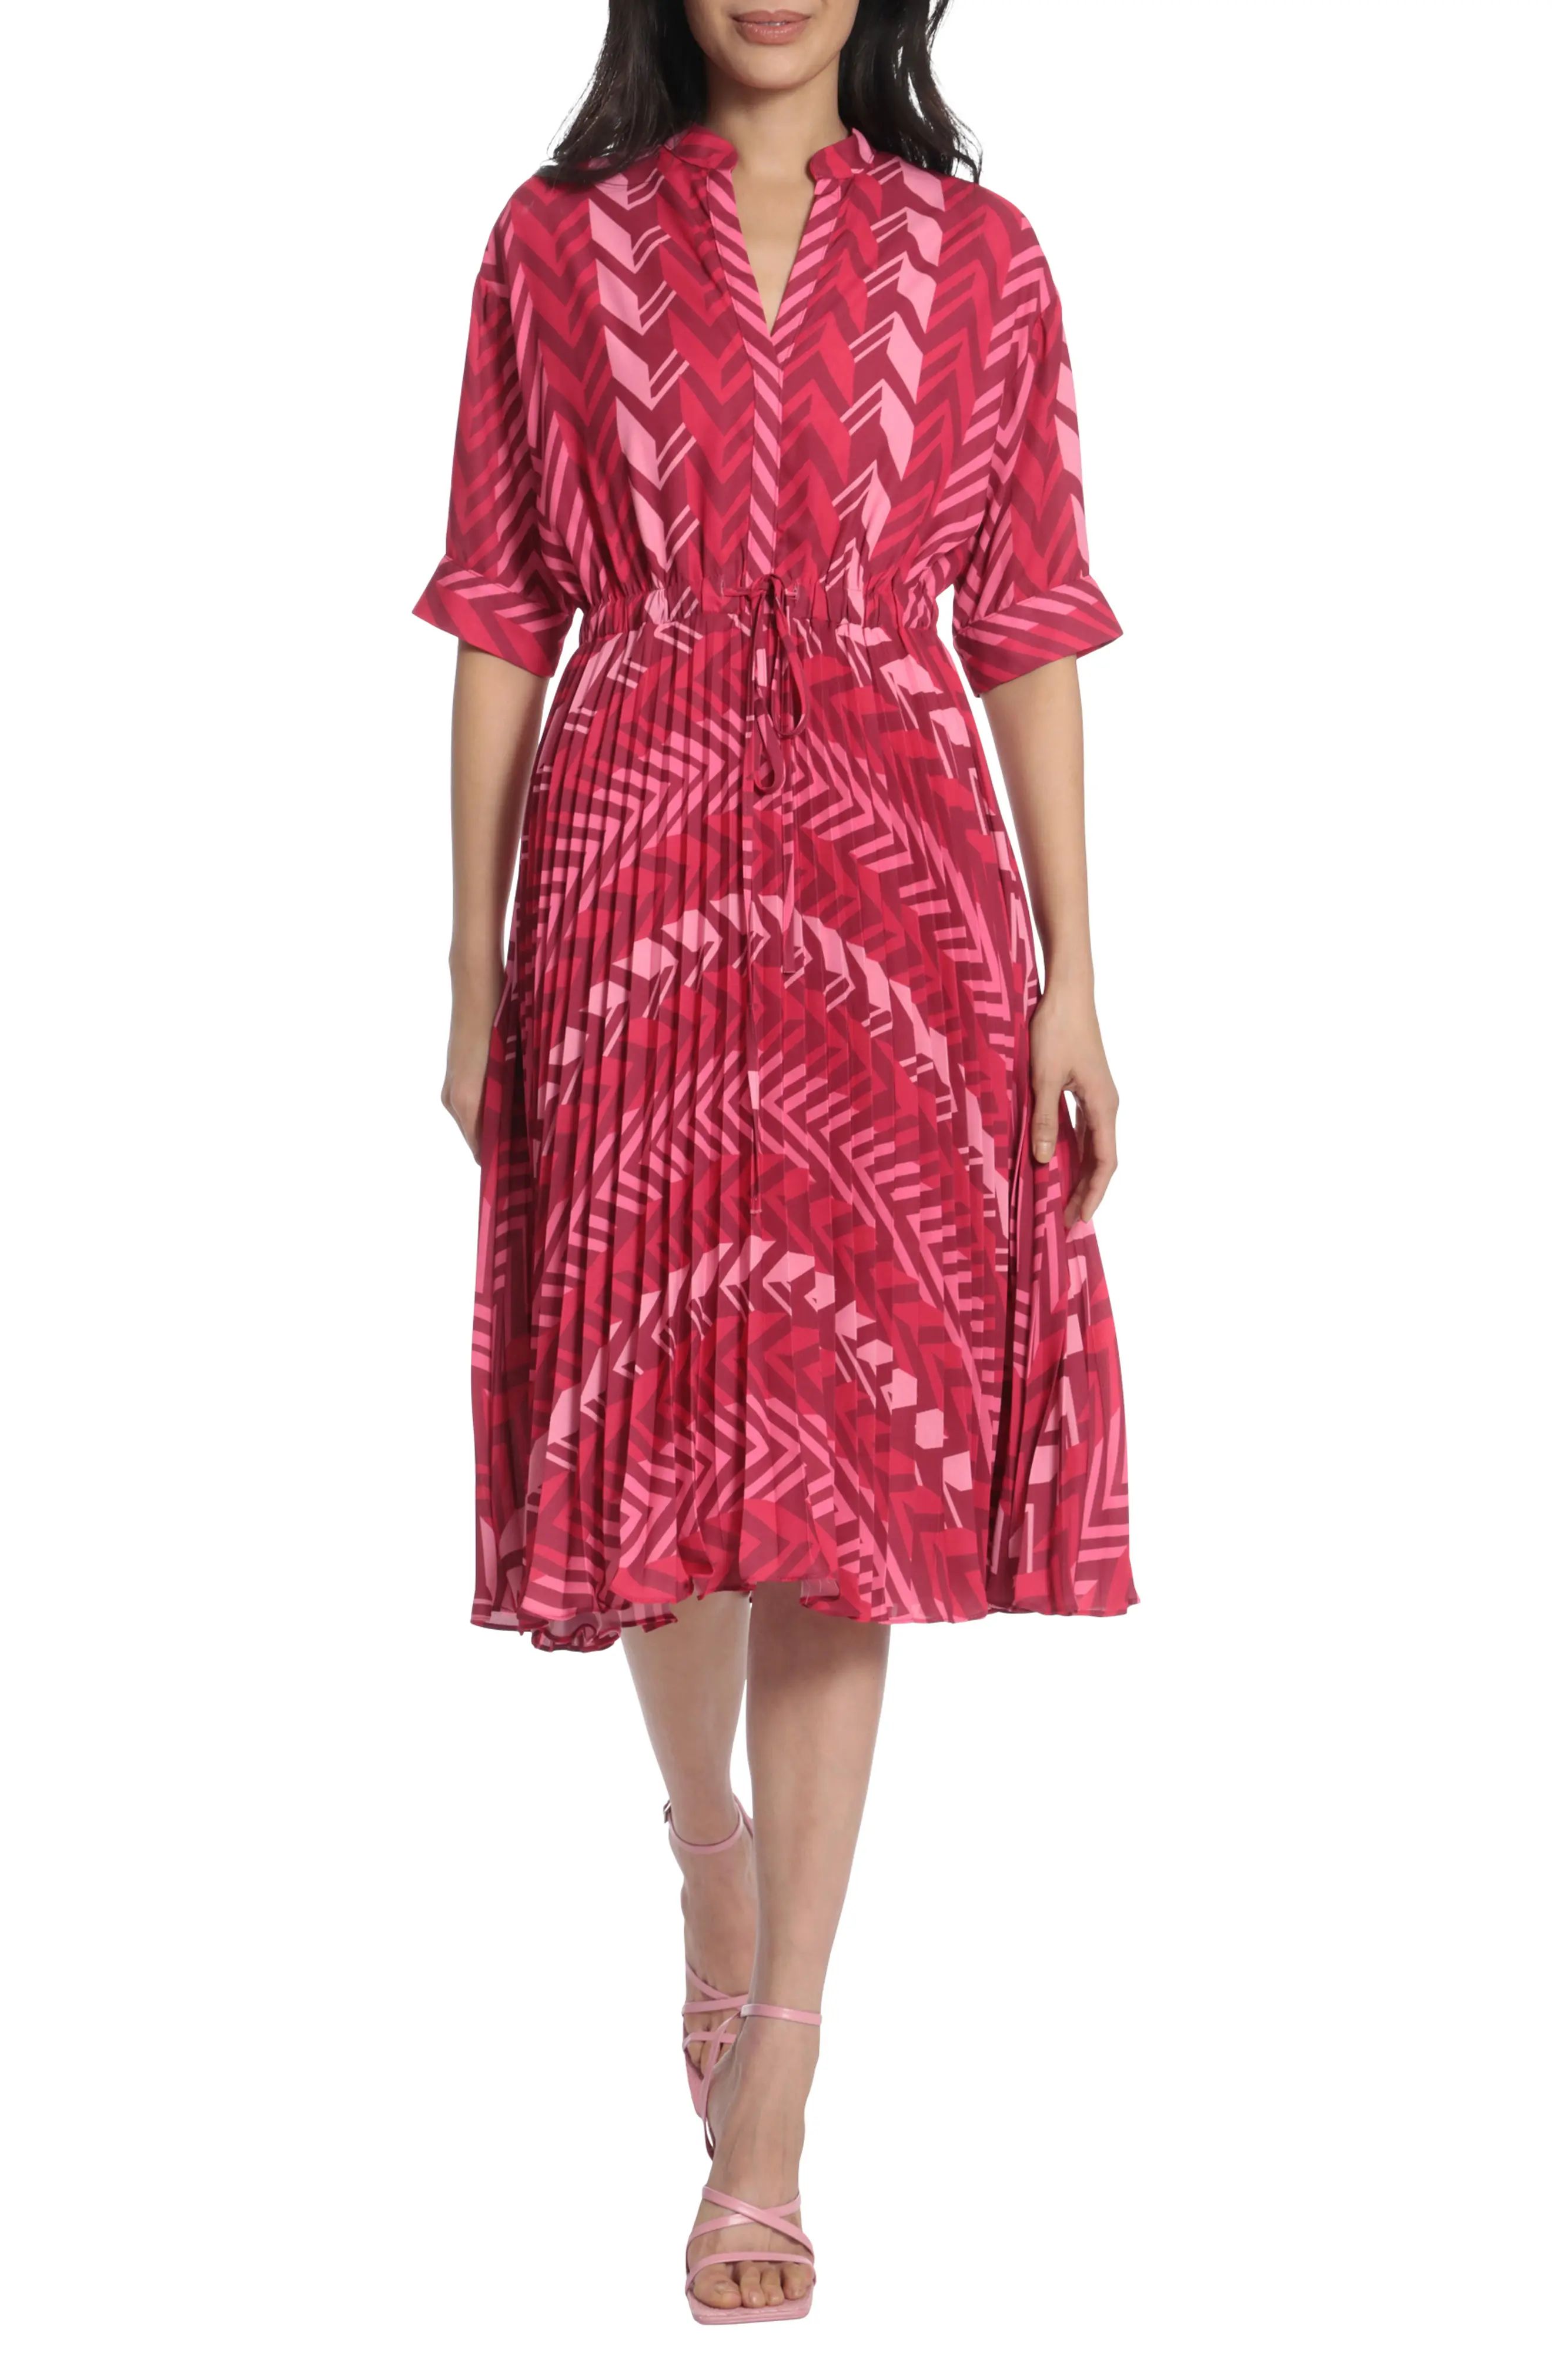 Maggy London Pleated Midi Dress in Berry/Hot Pink at Nordstrom, Size 8 | Nordstrom